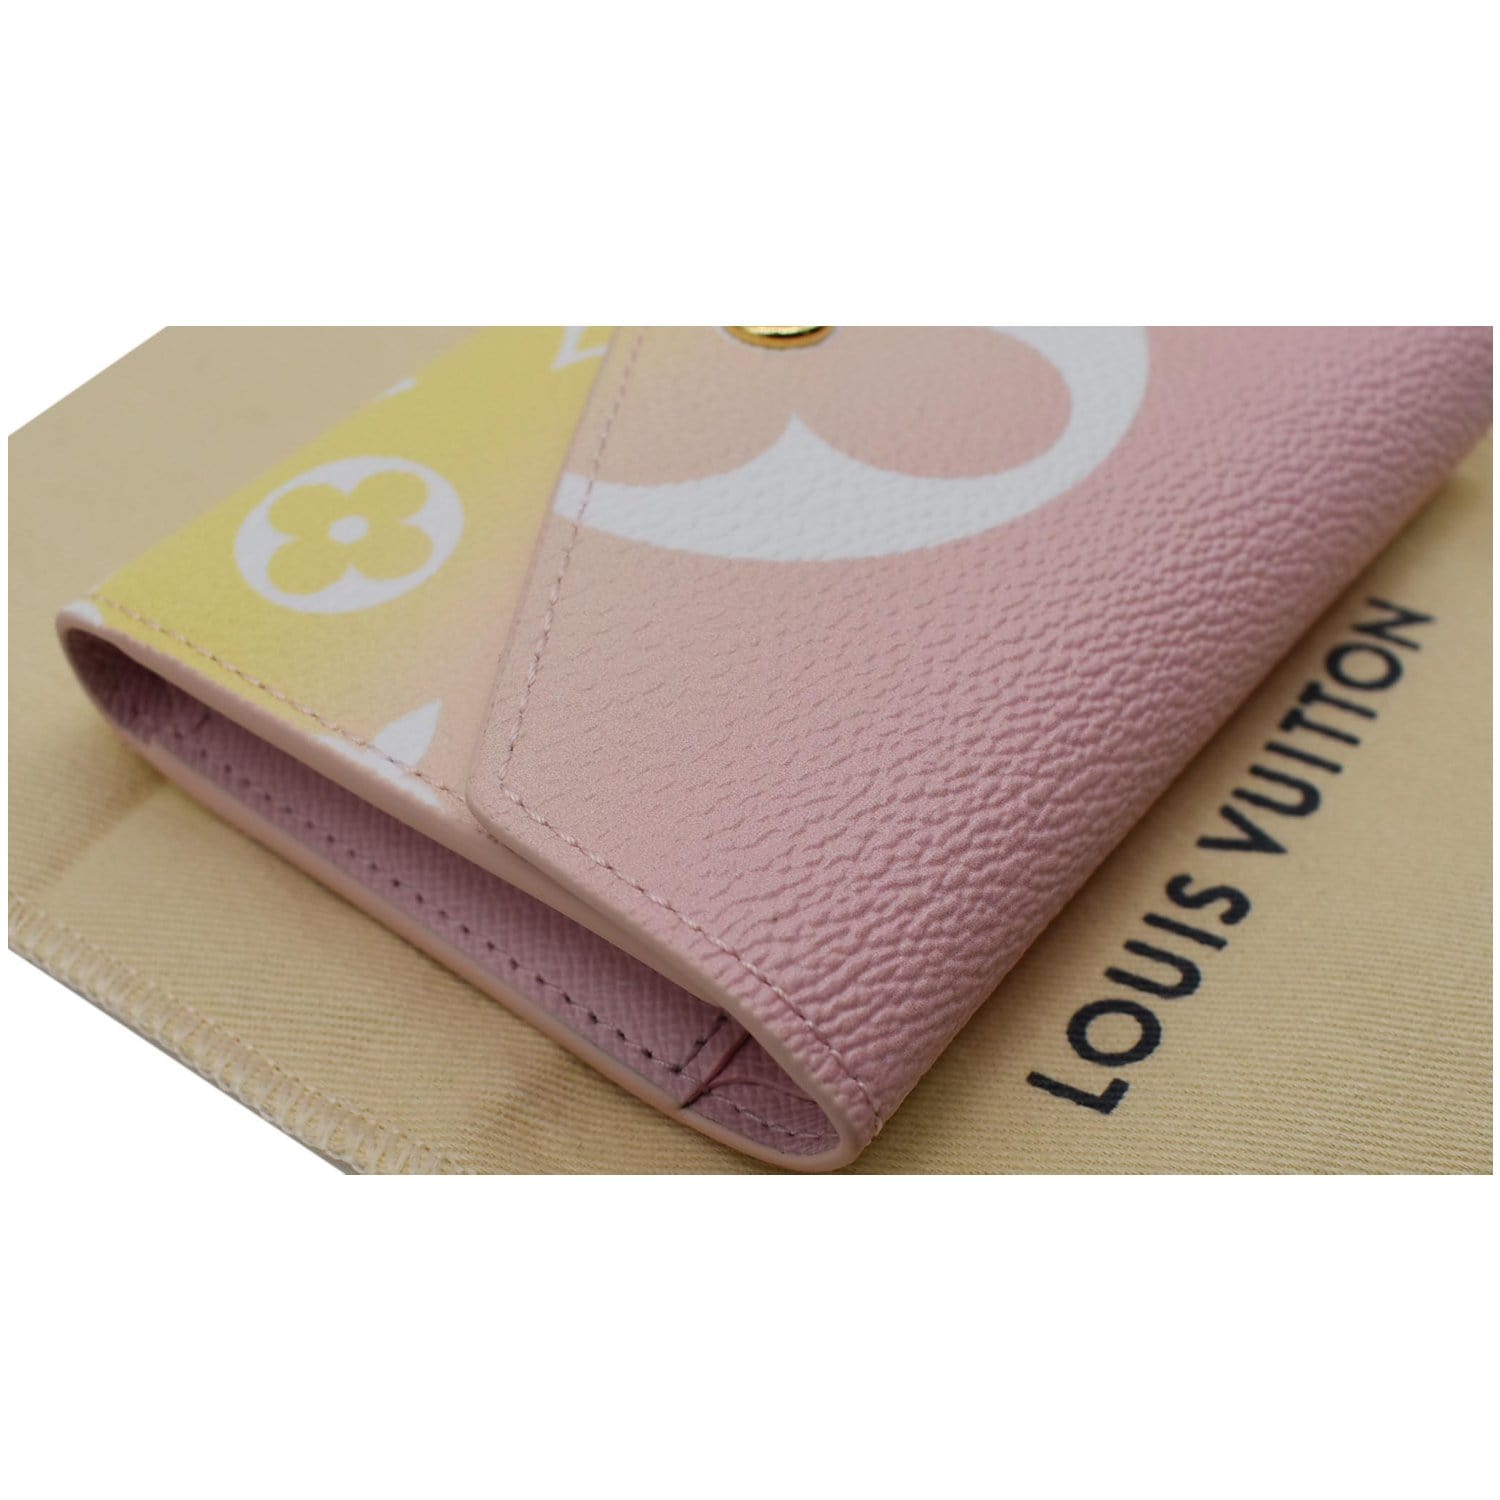 Louis Vuitton Victorine By the Pool Pink Yellow – DAC